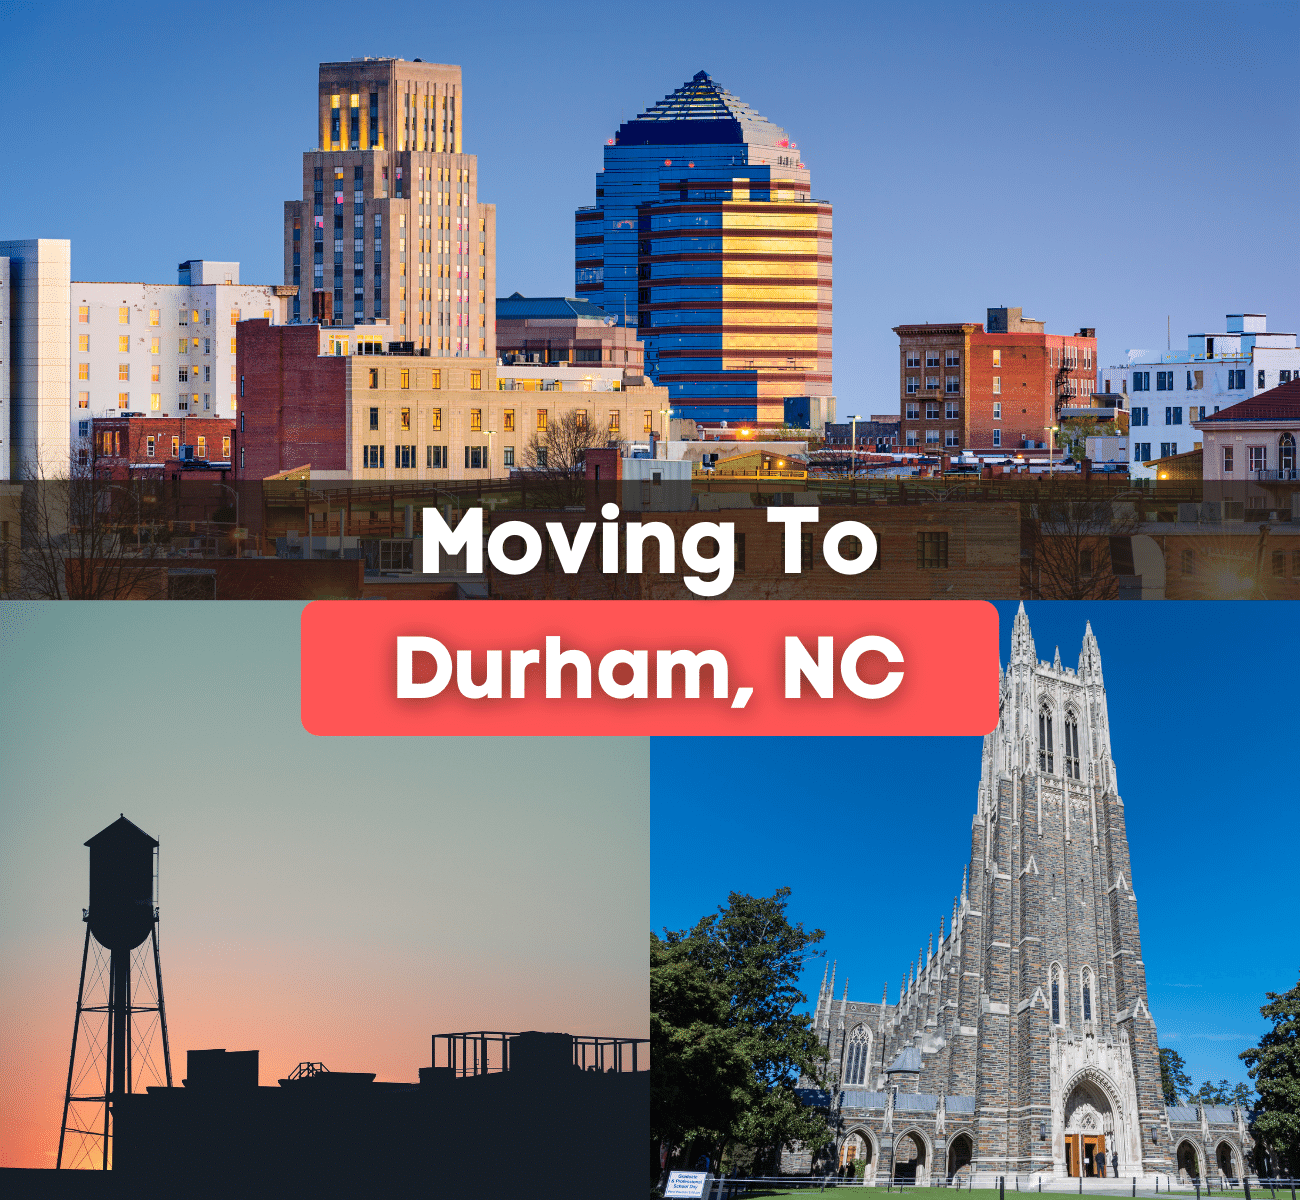 Moving to Durham, NC - What is it like living in Durham?